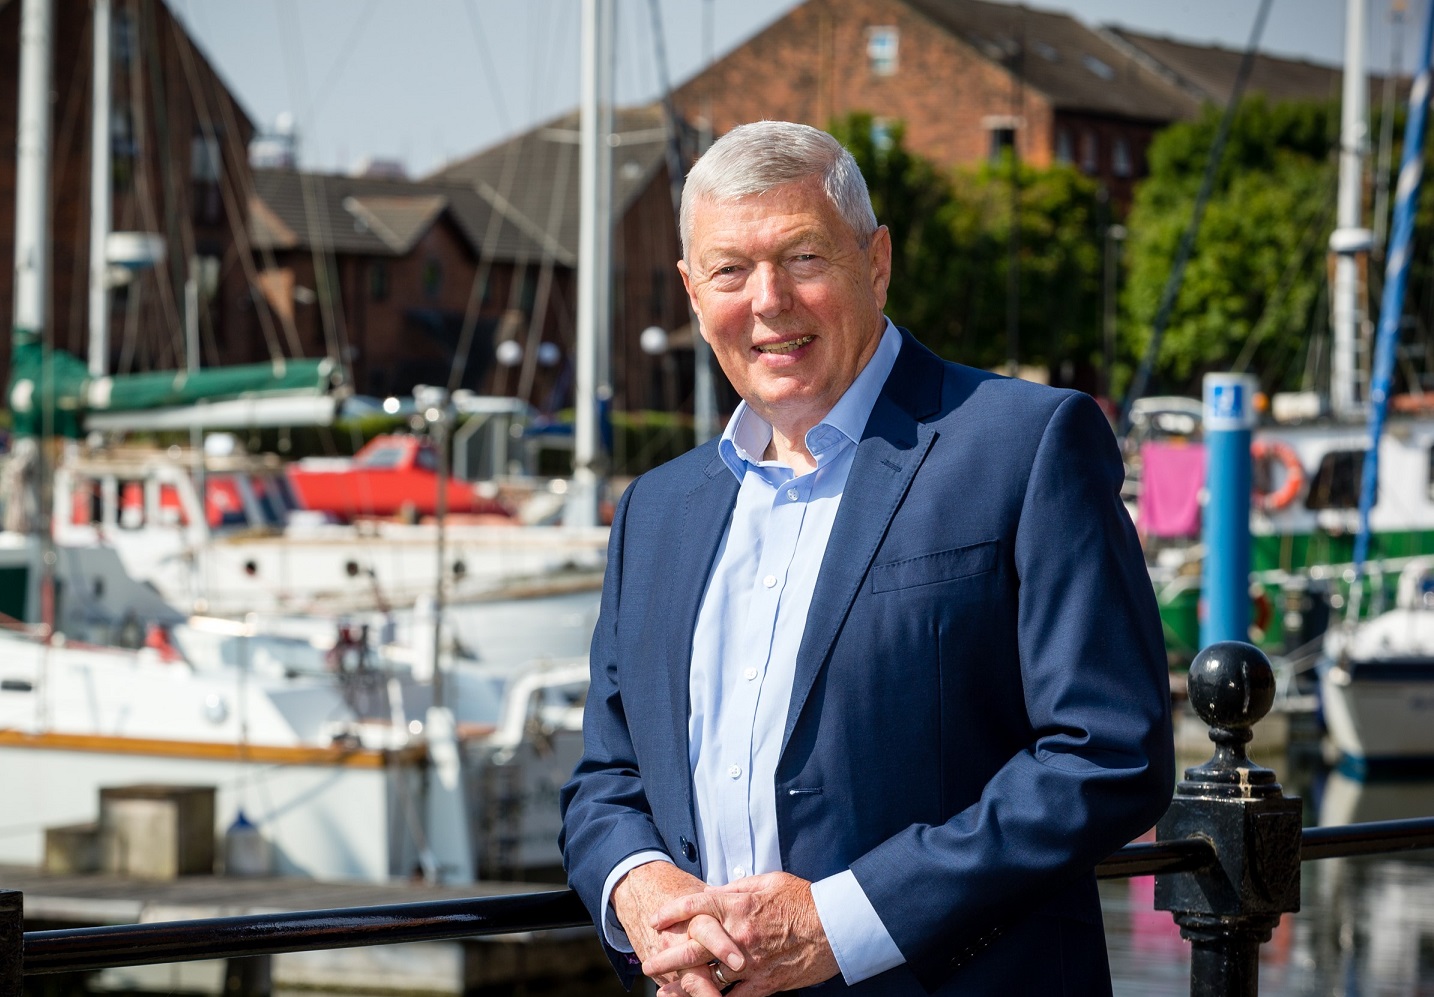 Alan Johnson, the former Hull West and Hessle MP, is patron of the Viola Trust.